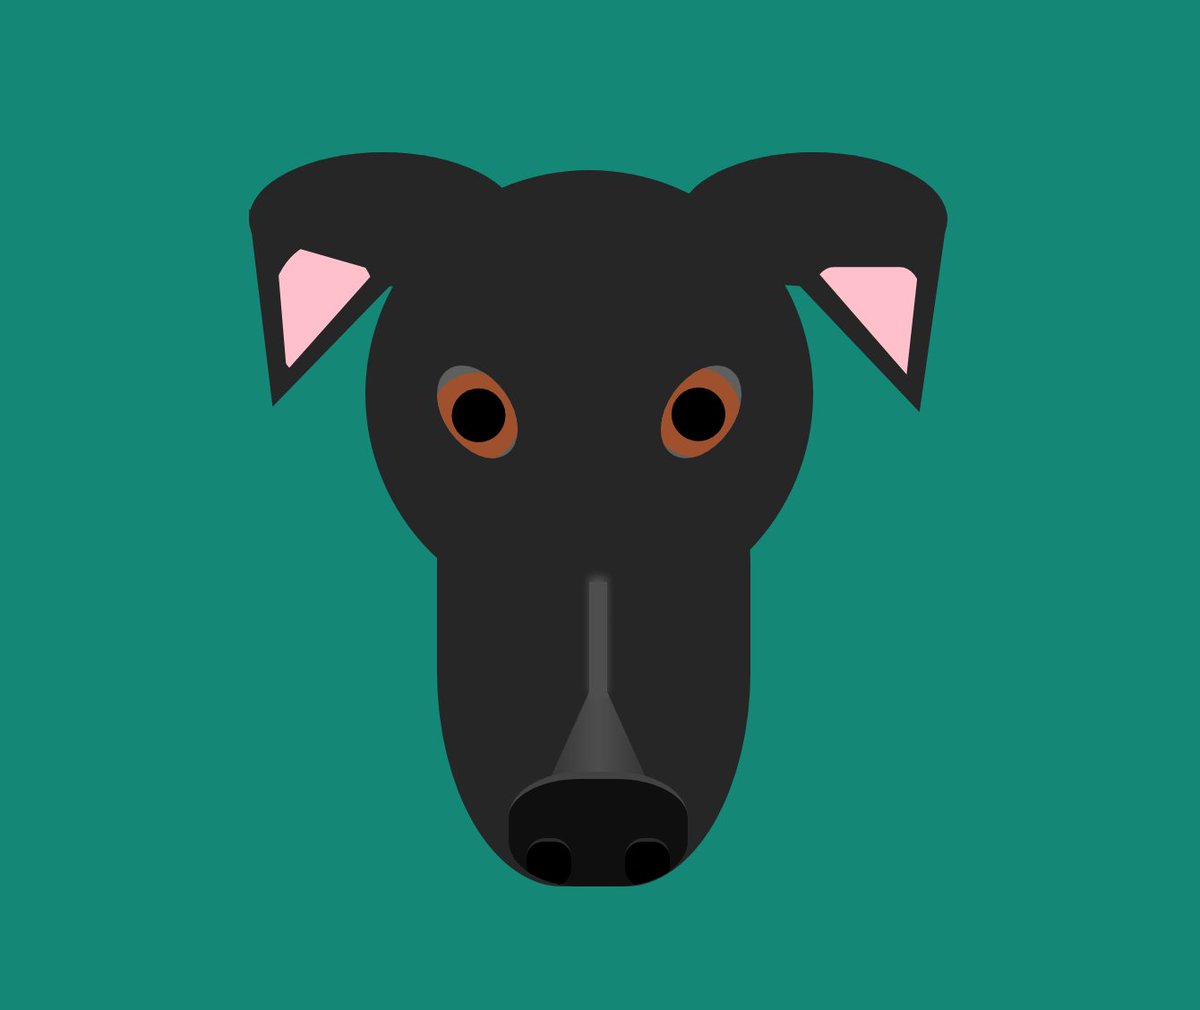 Day 10 is Lyra! I've been 'borrowing' this pup a few times a week for years now, and I'm missing her a lot during lockdown. I hope she approves of her CSS-ified portrait.  @CodePen is at  https://codepen.io/aitchiss/pen/rNOKPLG  #100daysProjectScotland  #100daysProjectScotland2020